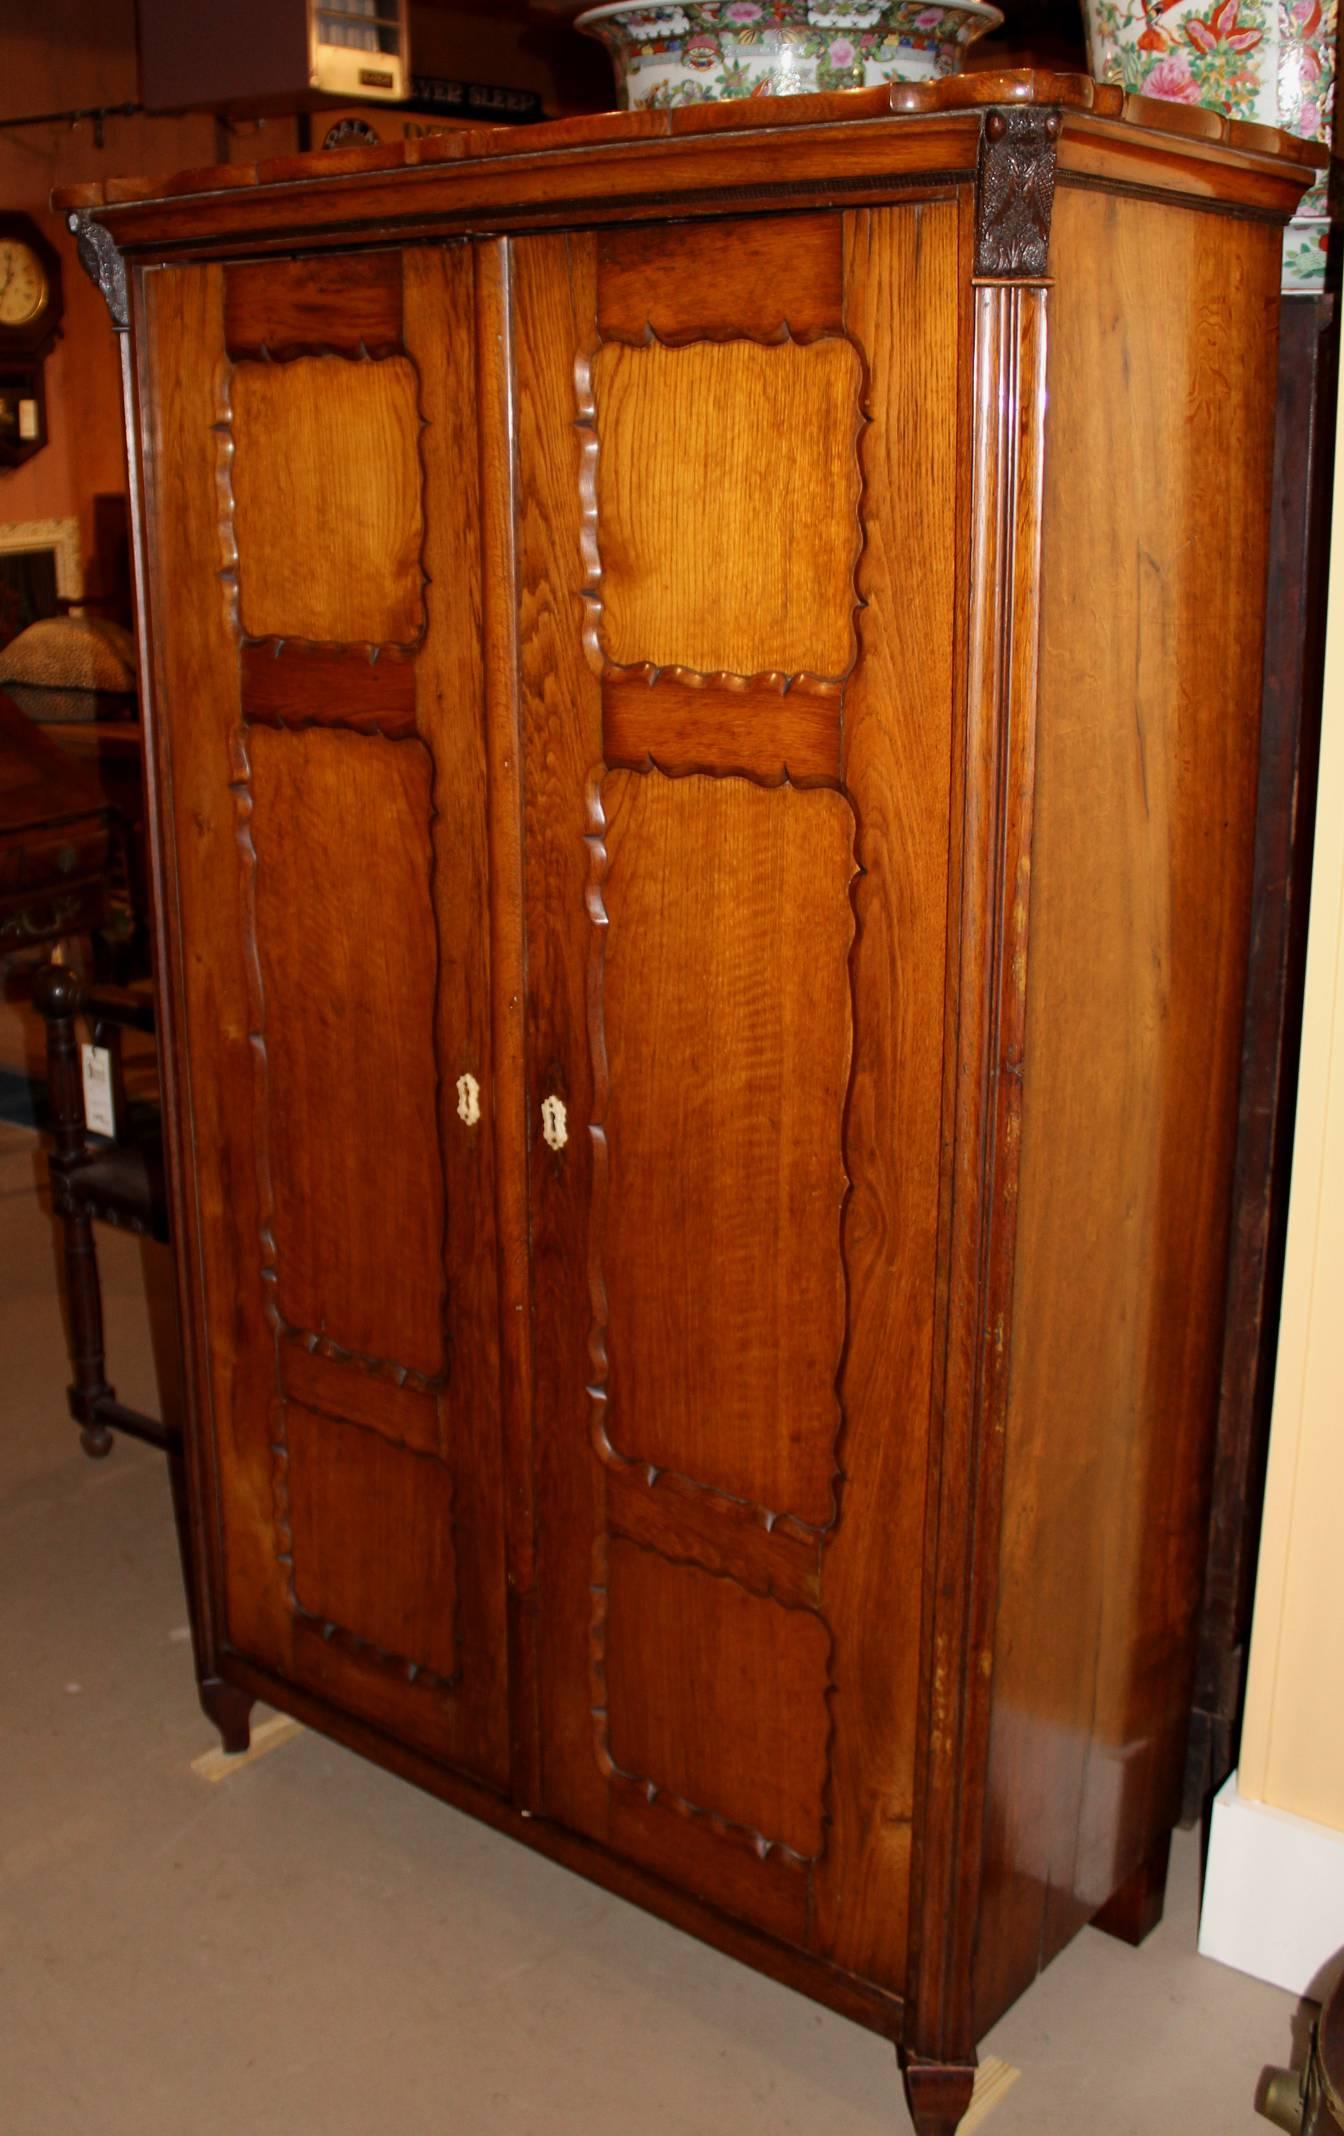 Carved Diminutive 19th Century French Fruitwood Armoire